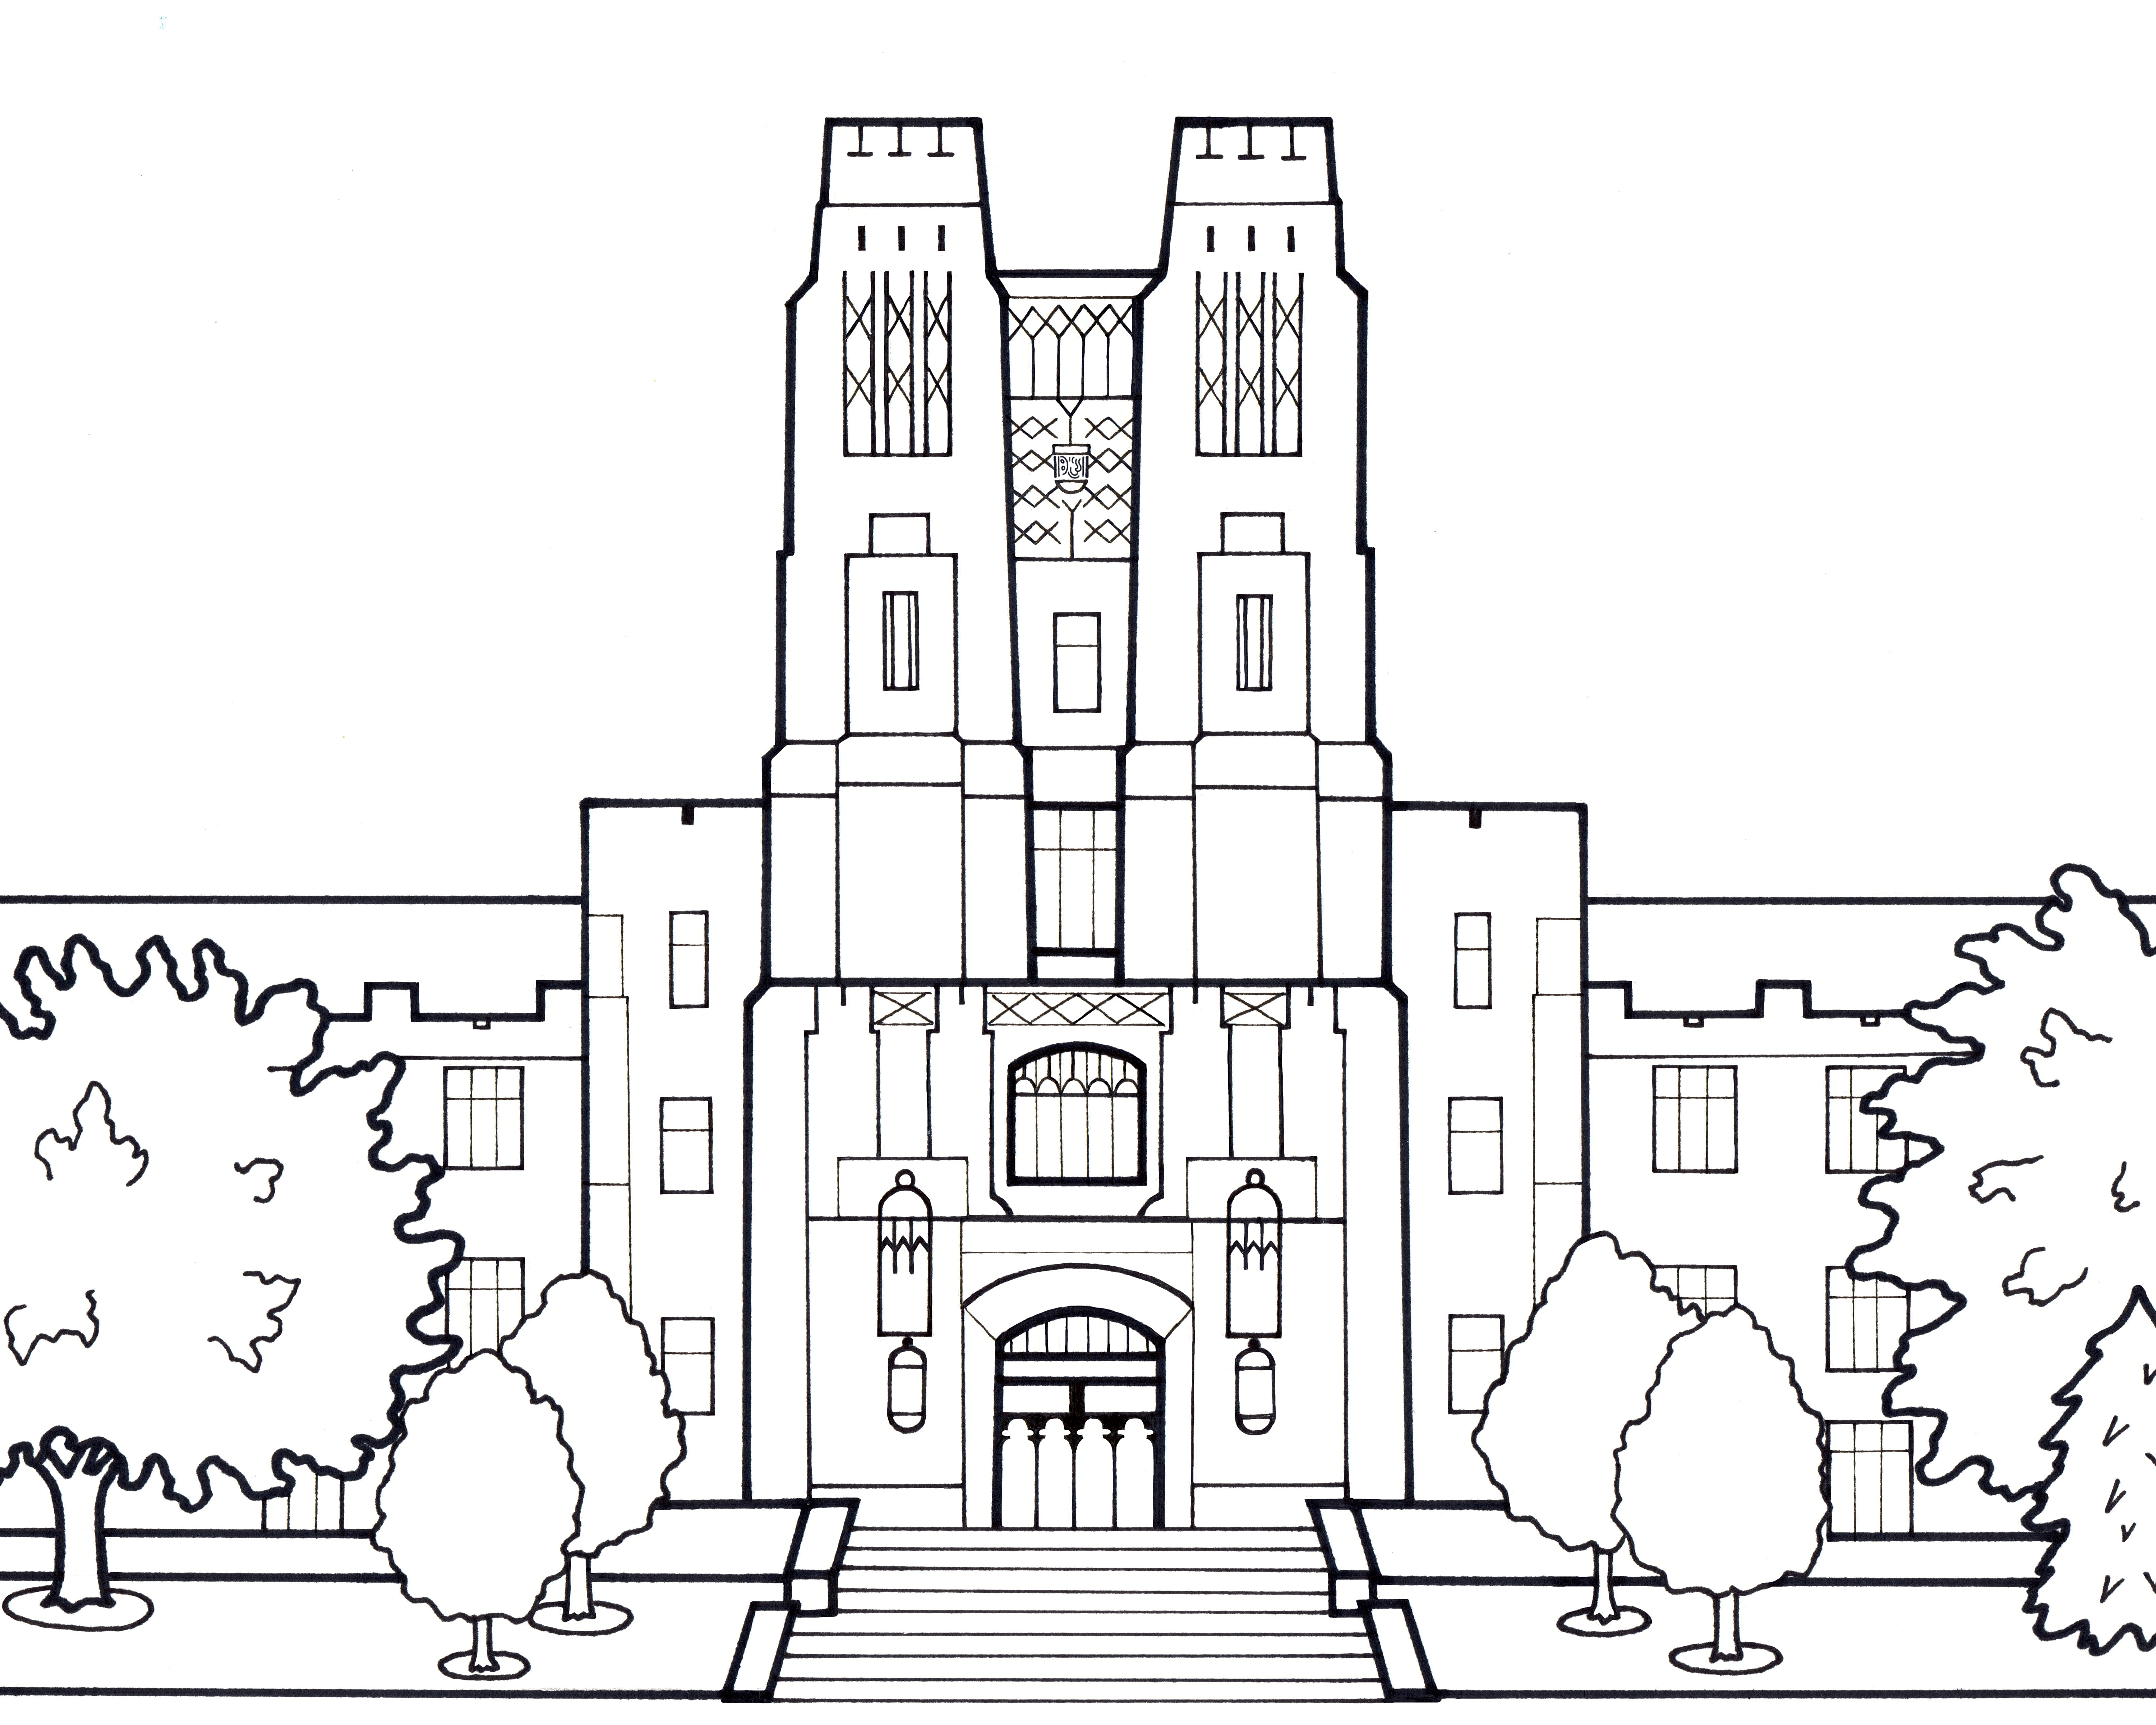 Coloring pages | Alumni Relations | Virginia Tech